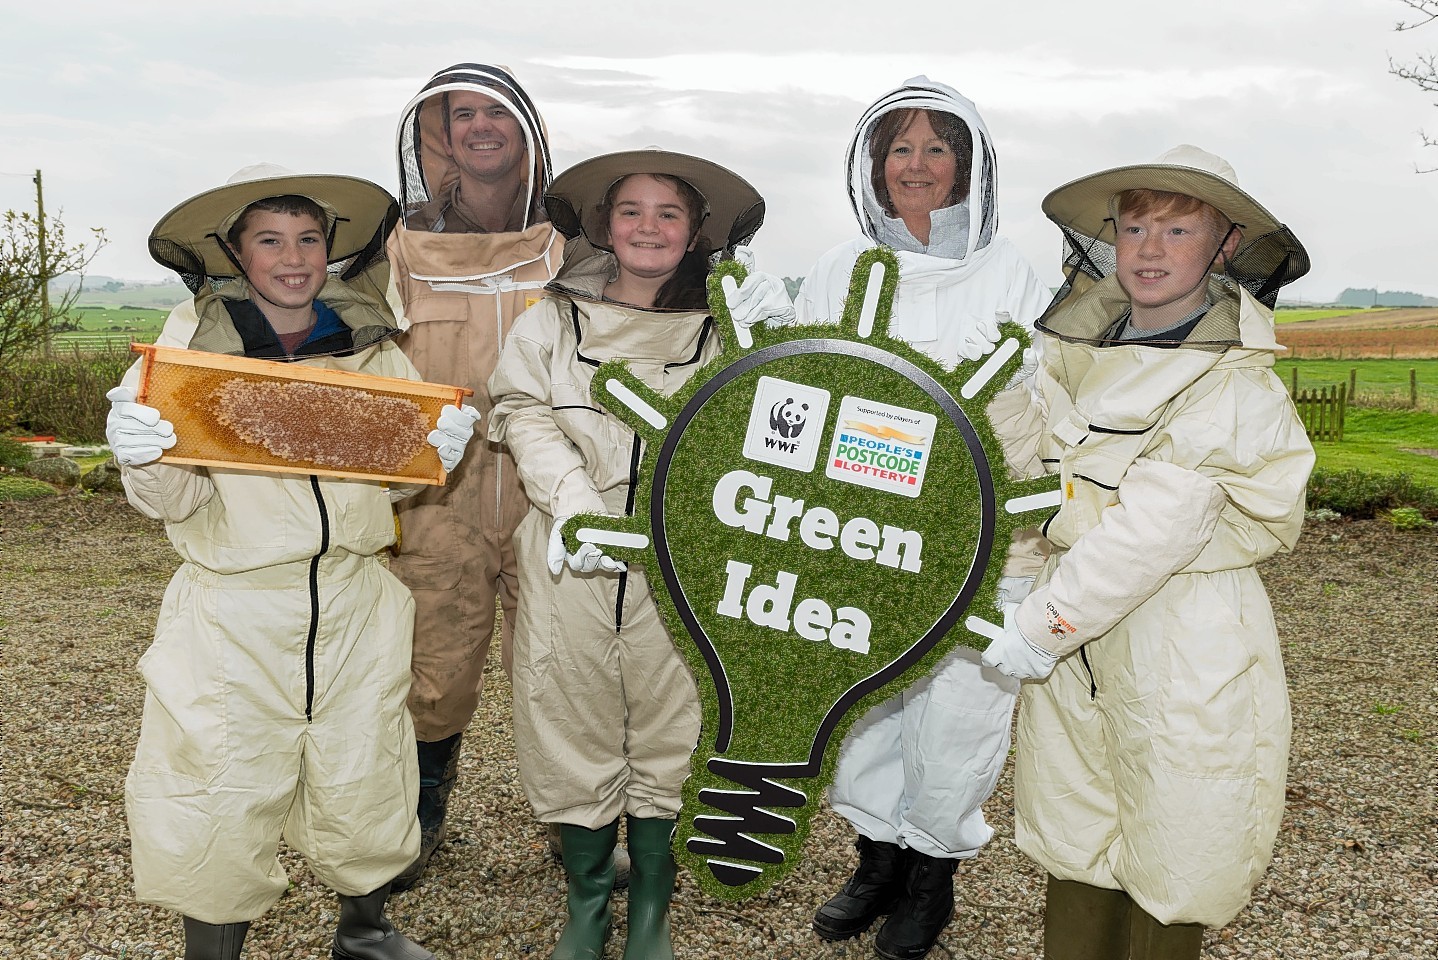 Greenbrae School have produced their first honey harvest